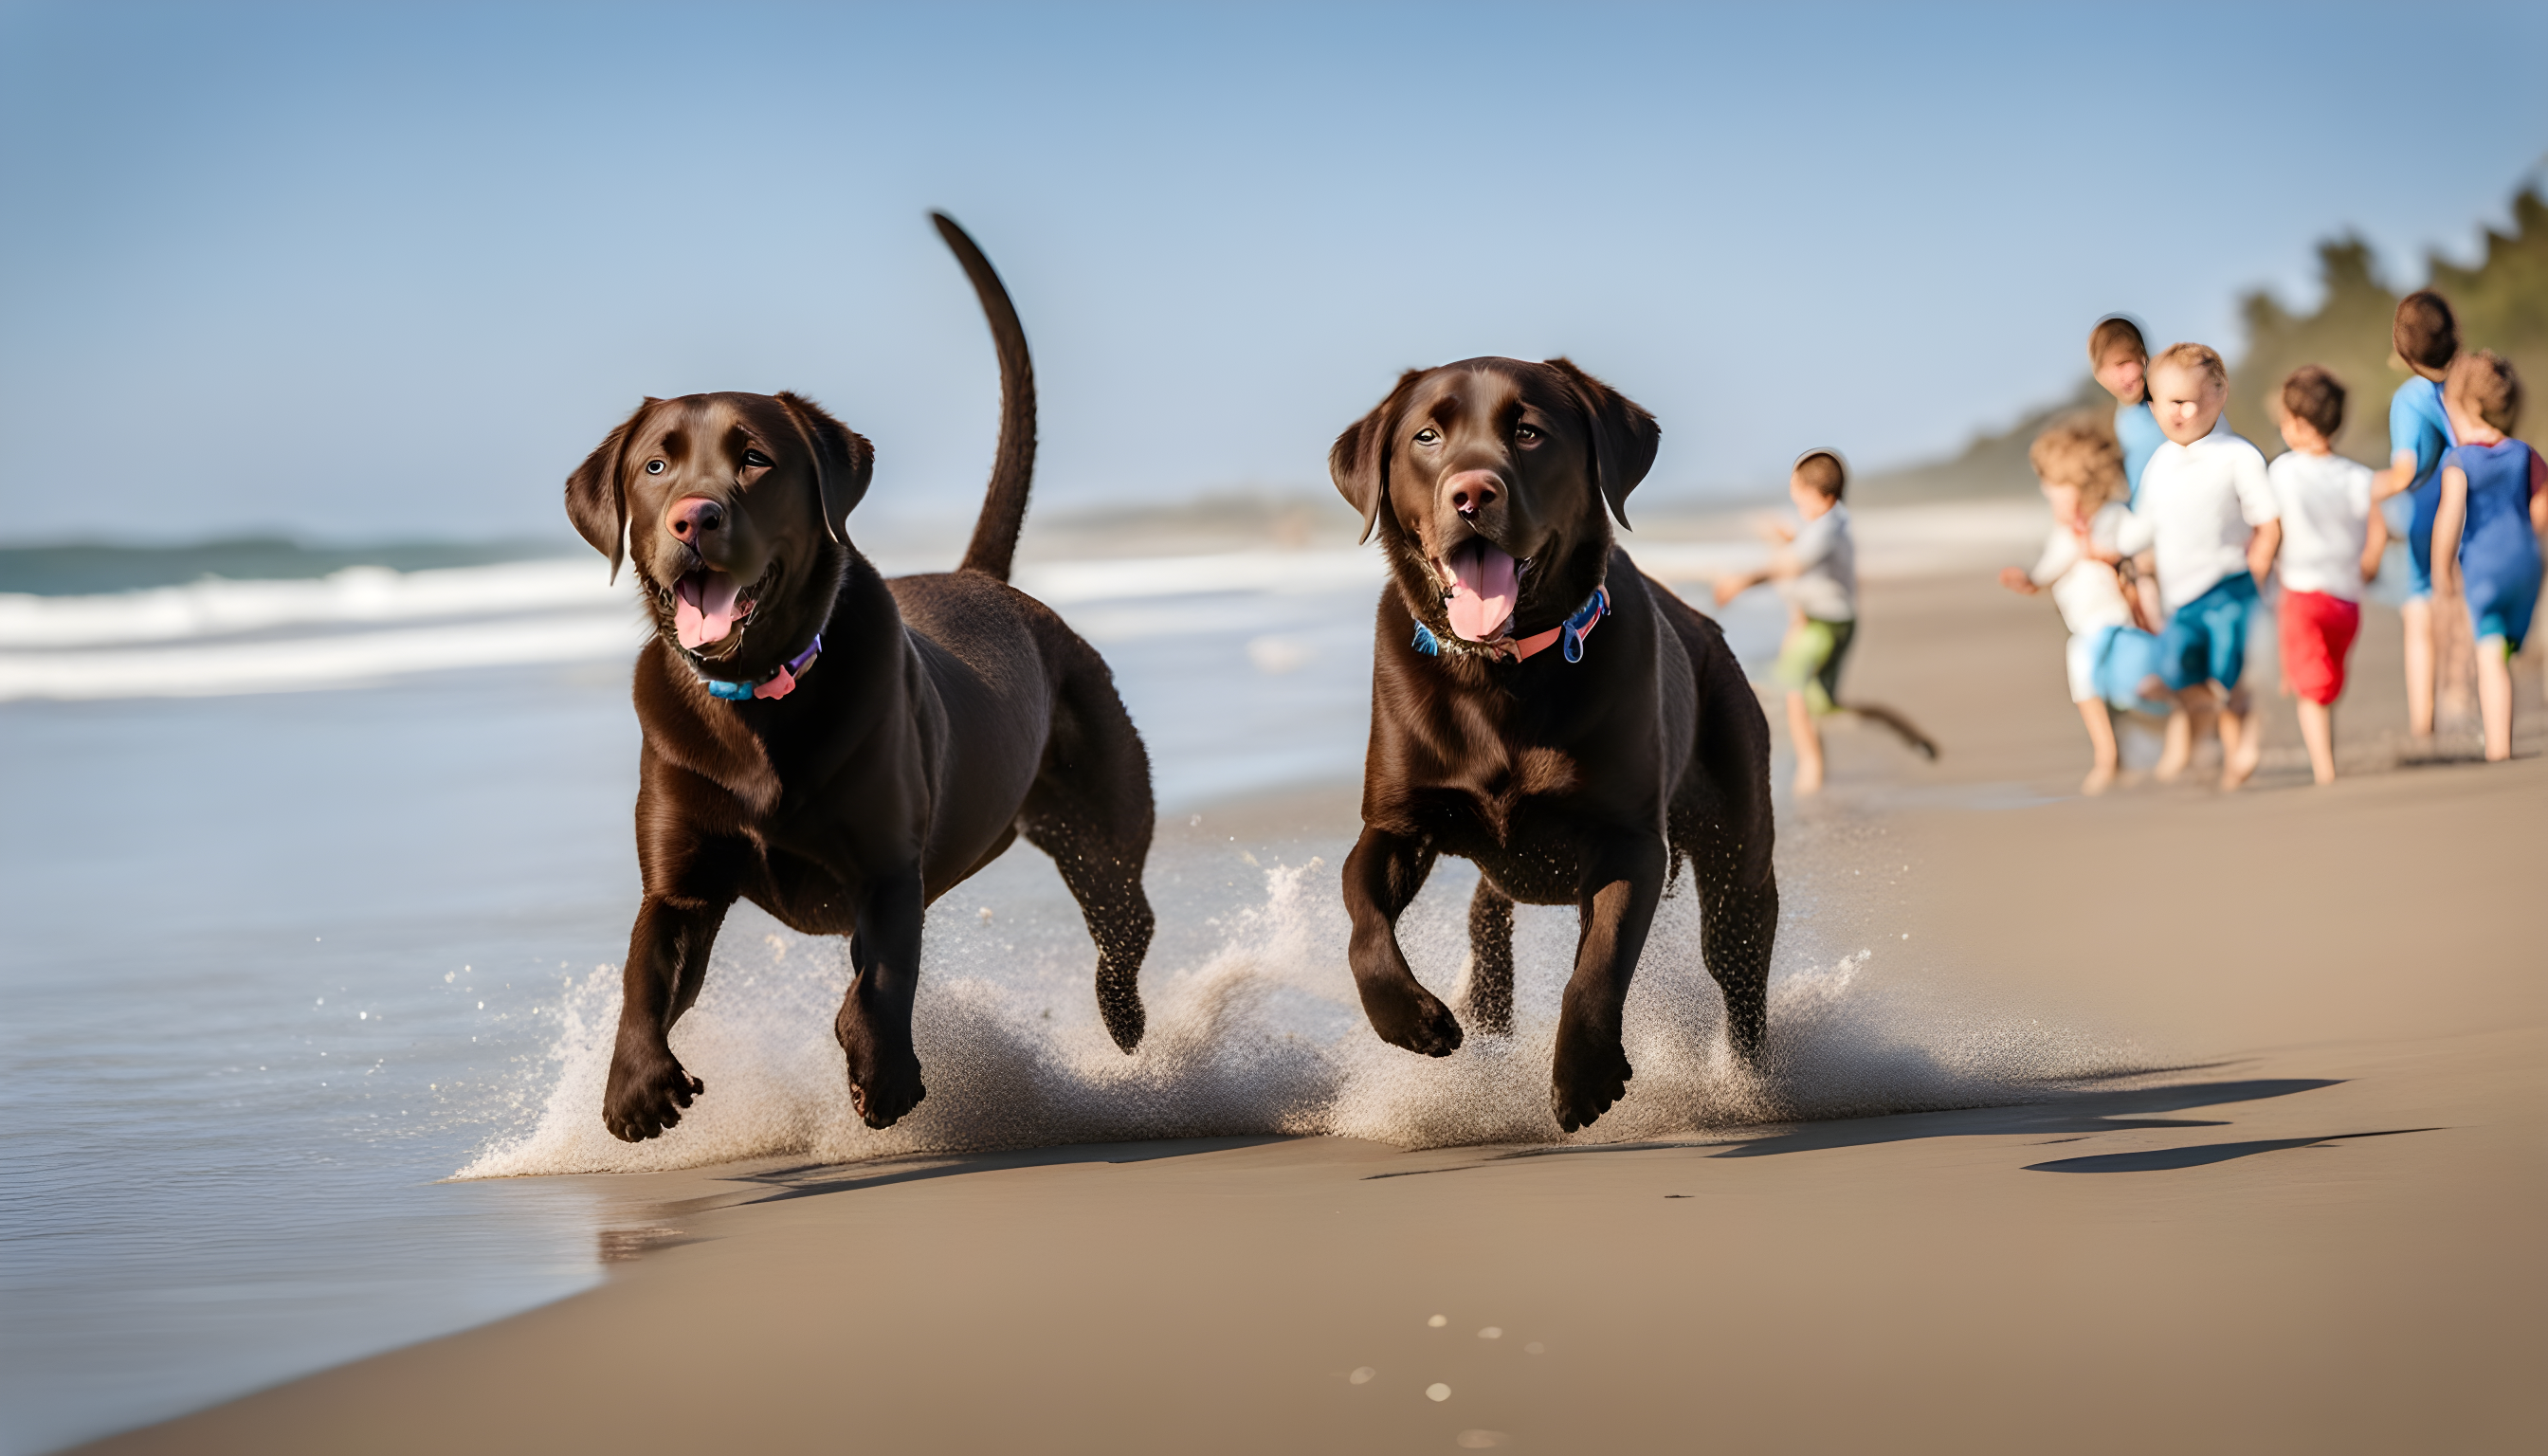 English Chocolate Lab frolicking with kids at a beach